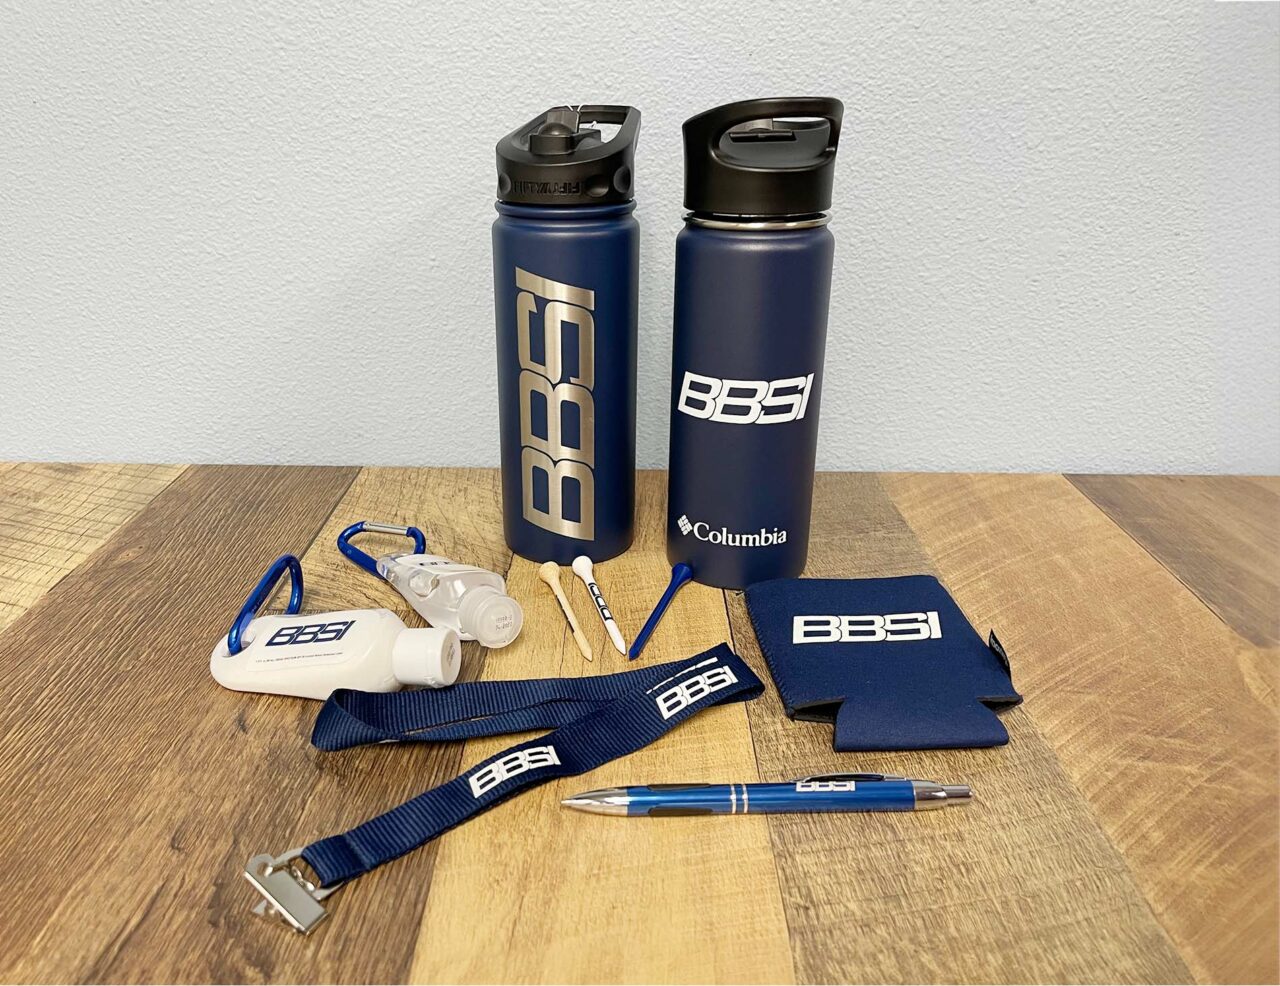 Example of Morel's promotional capabilities, showing branded water bottles, hand sanitizers, lanyard, and pen.